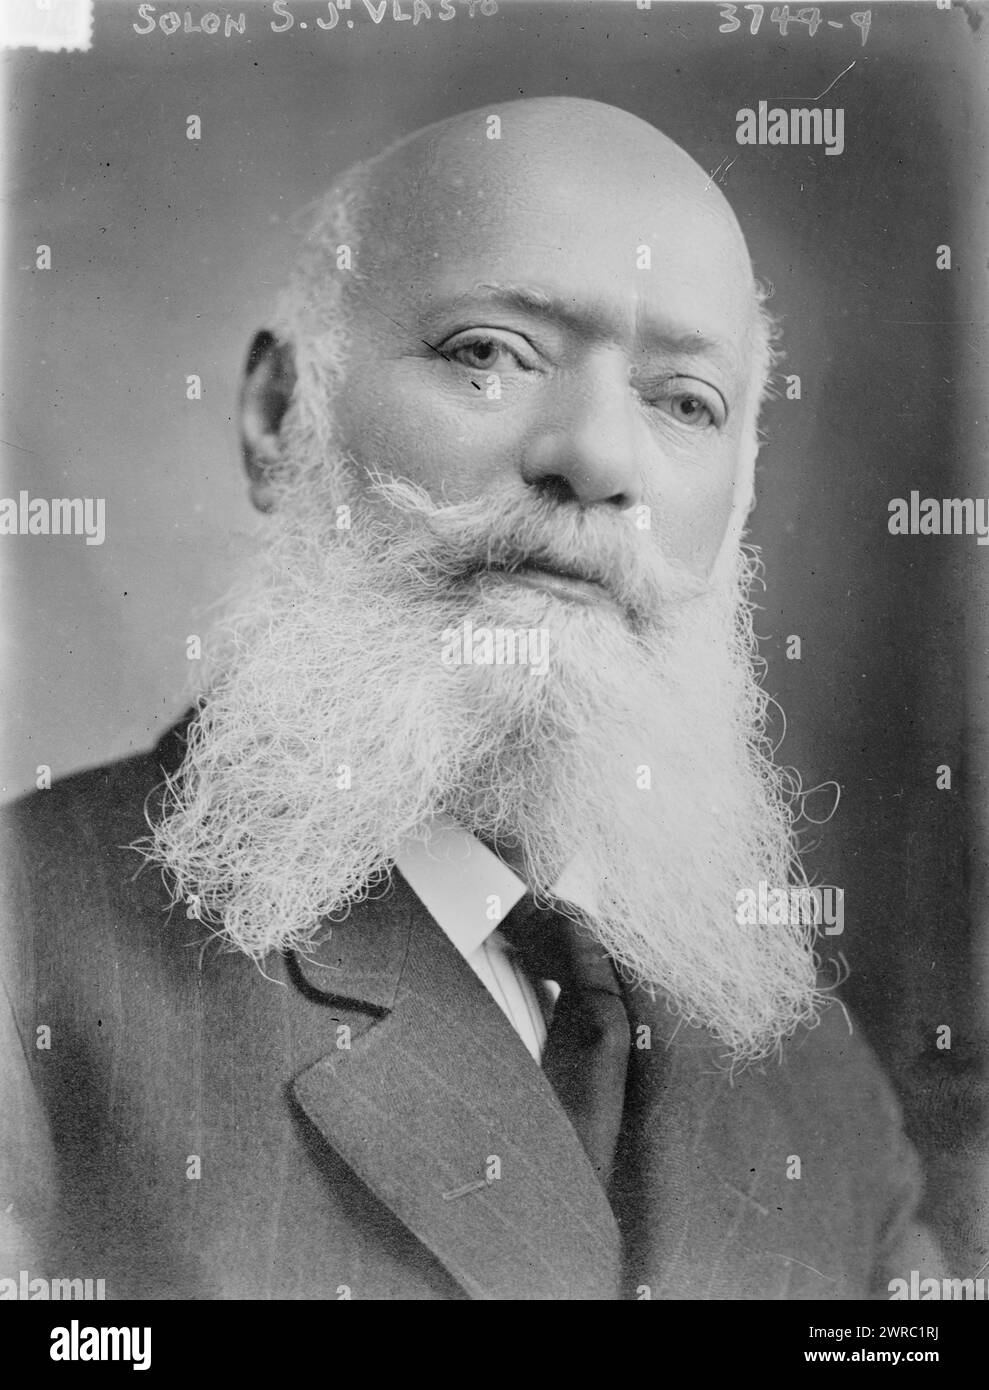 Solon S.J. Vlasto, Photograph shows Solon Stylien J. Vlasto (1852-1927) founder and editor of the New York City Greek language newspaper, Atlantis., between ca. 1915 and ca. 1920, Glass negatives, 1 negative: glass Stock Photo